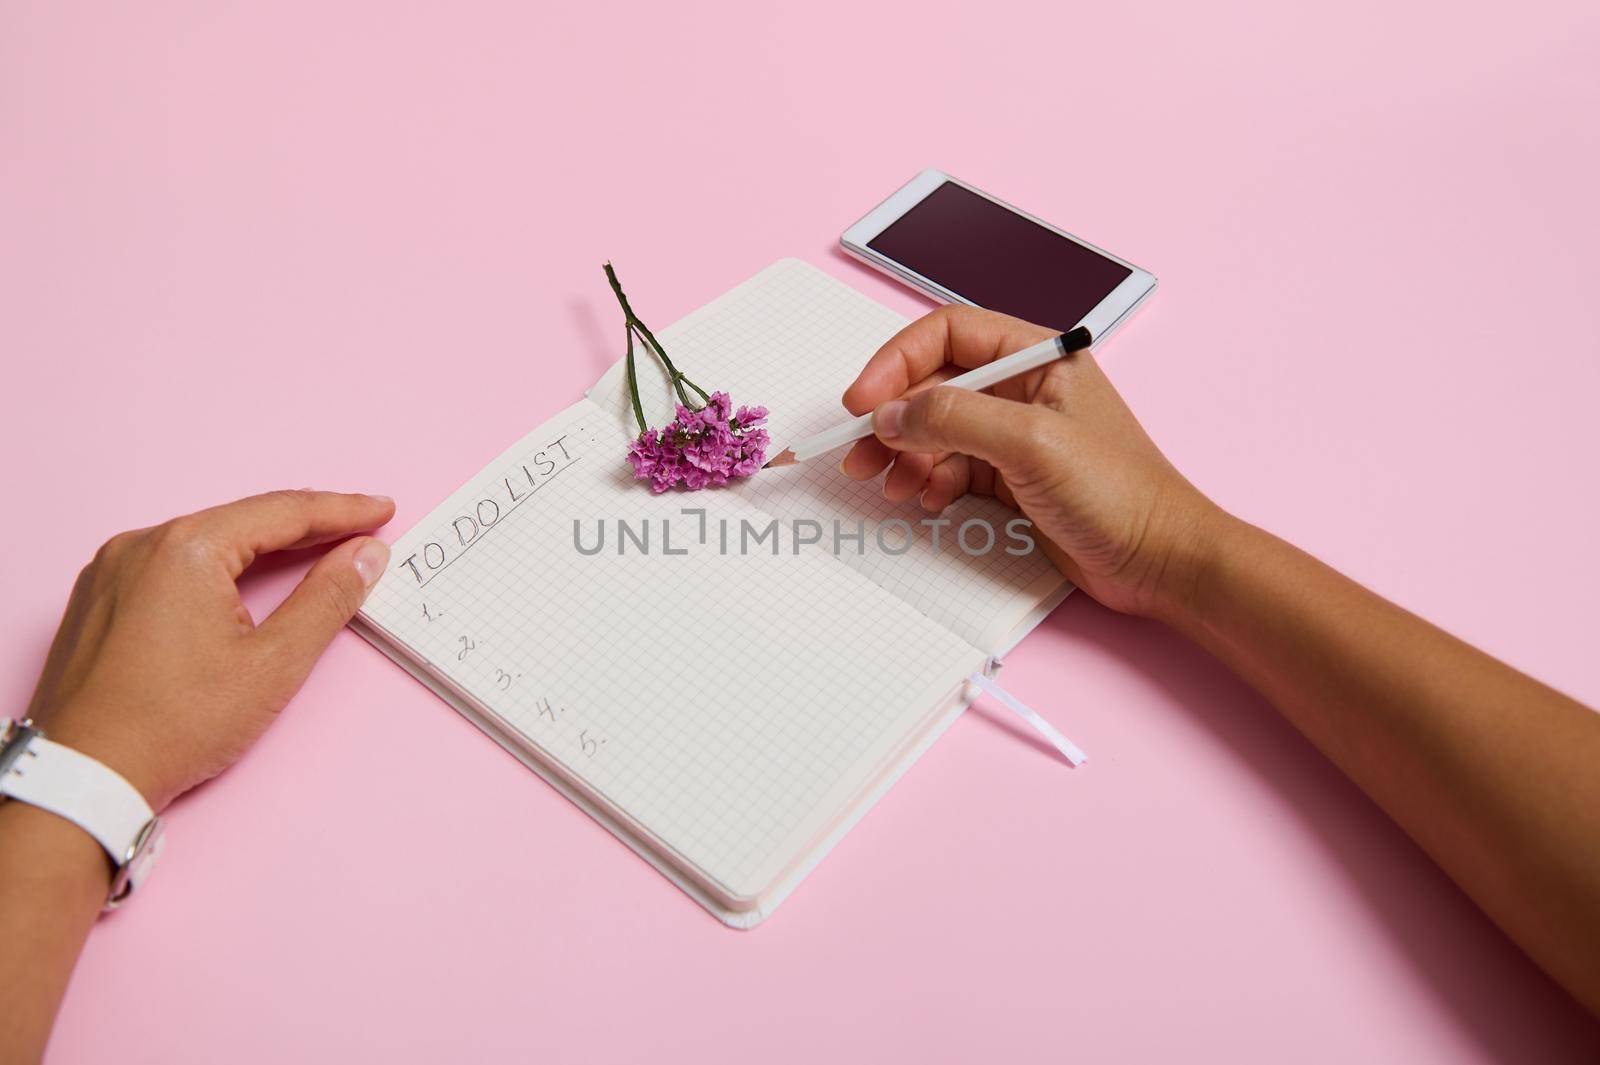 Female hands holding pencil, writing in notebook, checking to-do list. Mobile phone and pink flower lying on pink background with copy space. Business, planning and time management concept by artgf